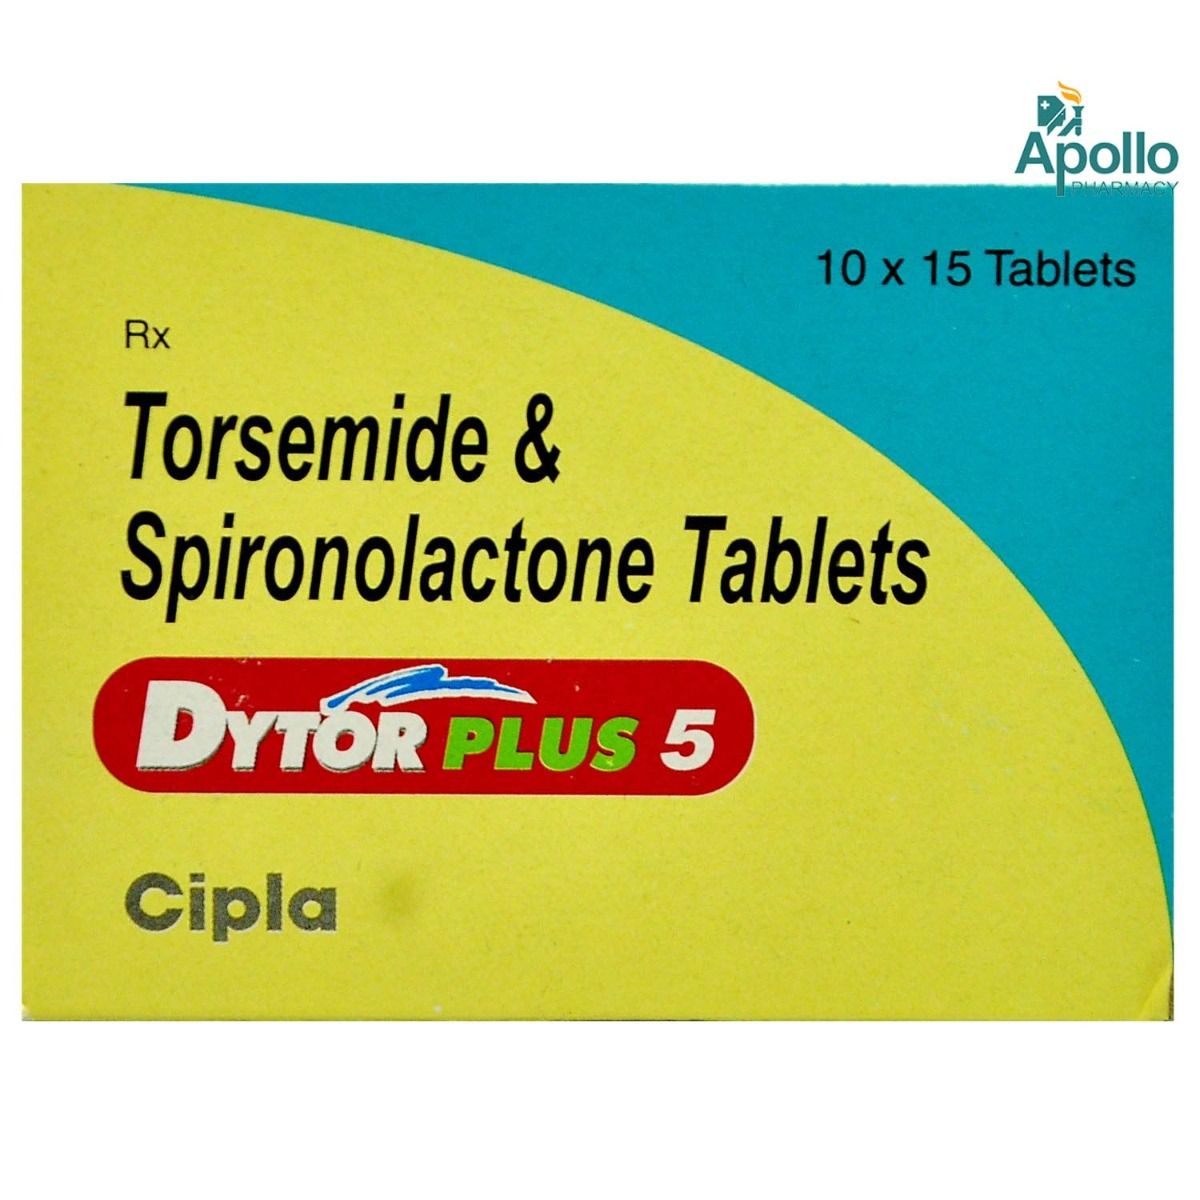 Dytor Plus 5 Tablet 15's, Pack of 15 TABLETS